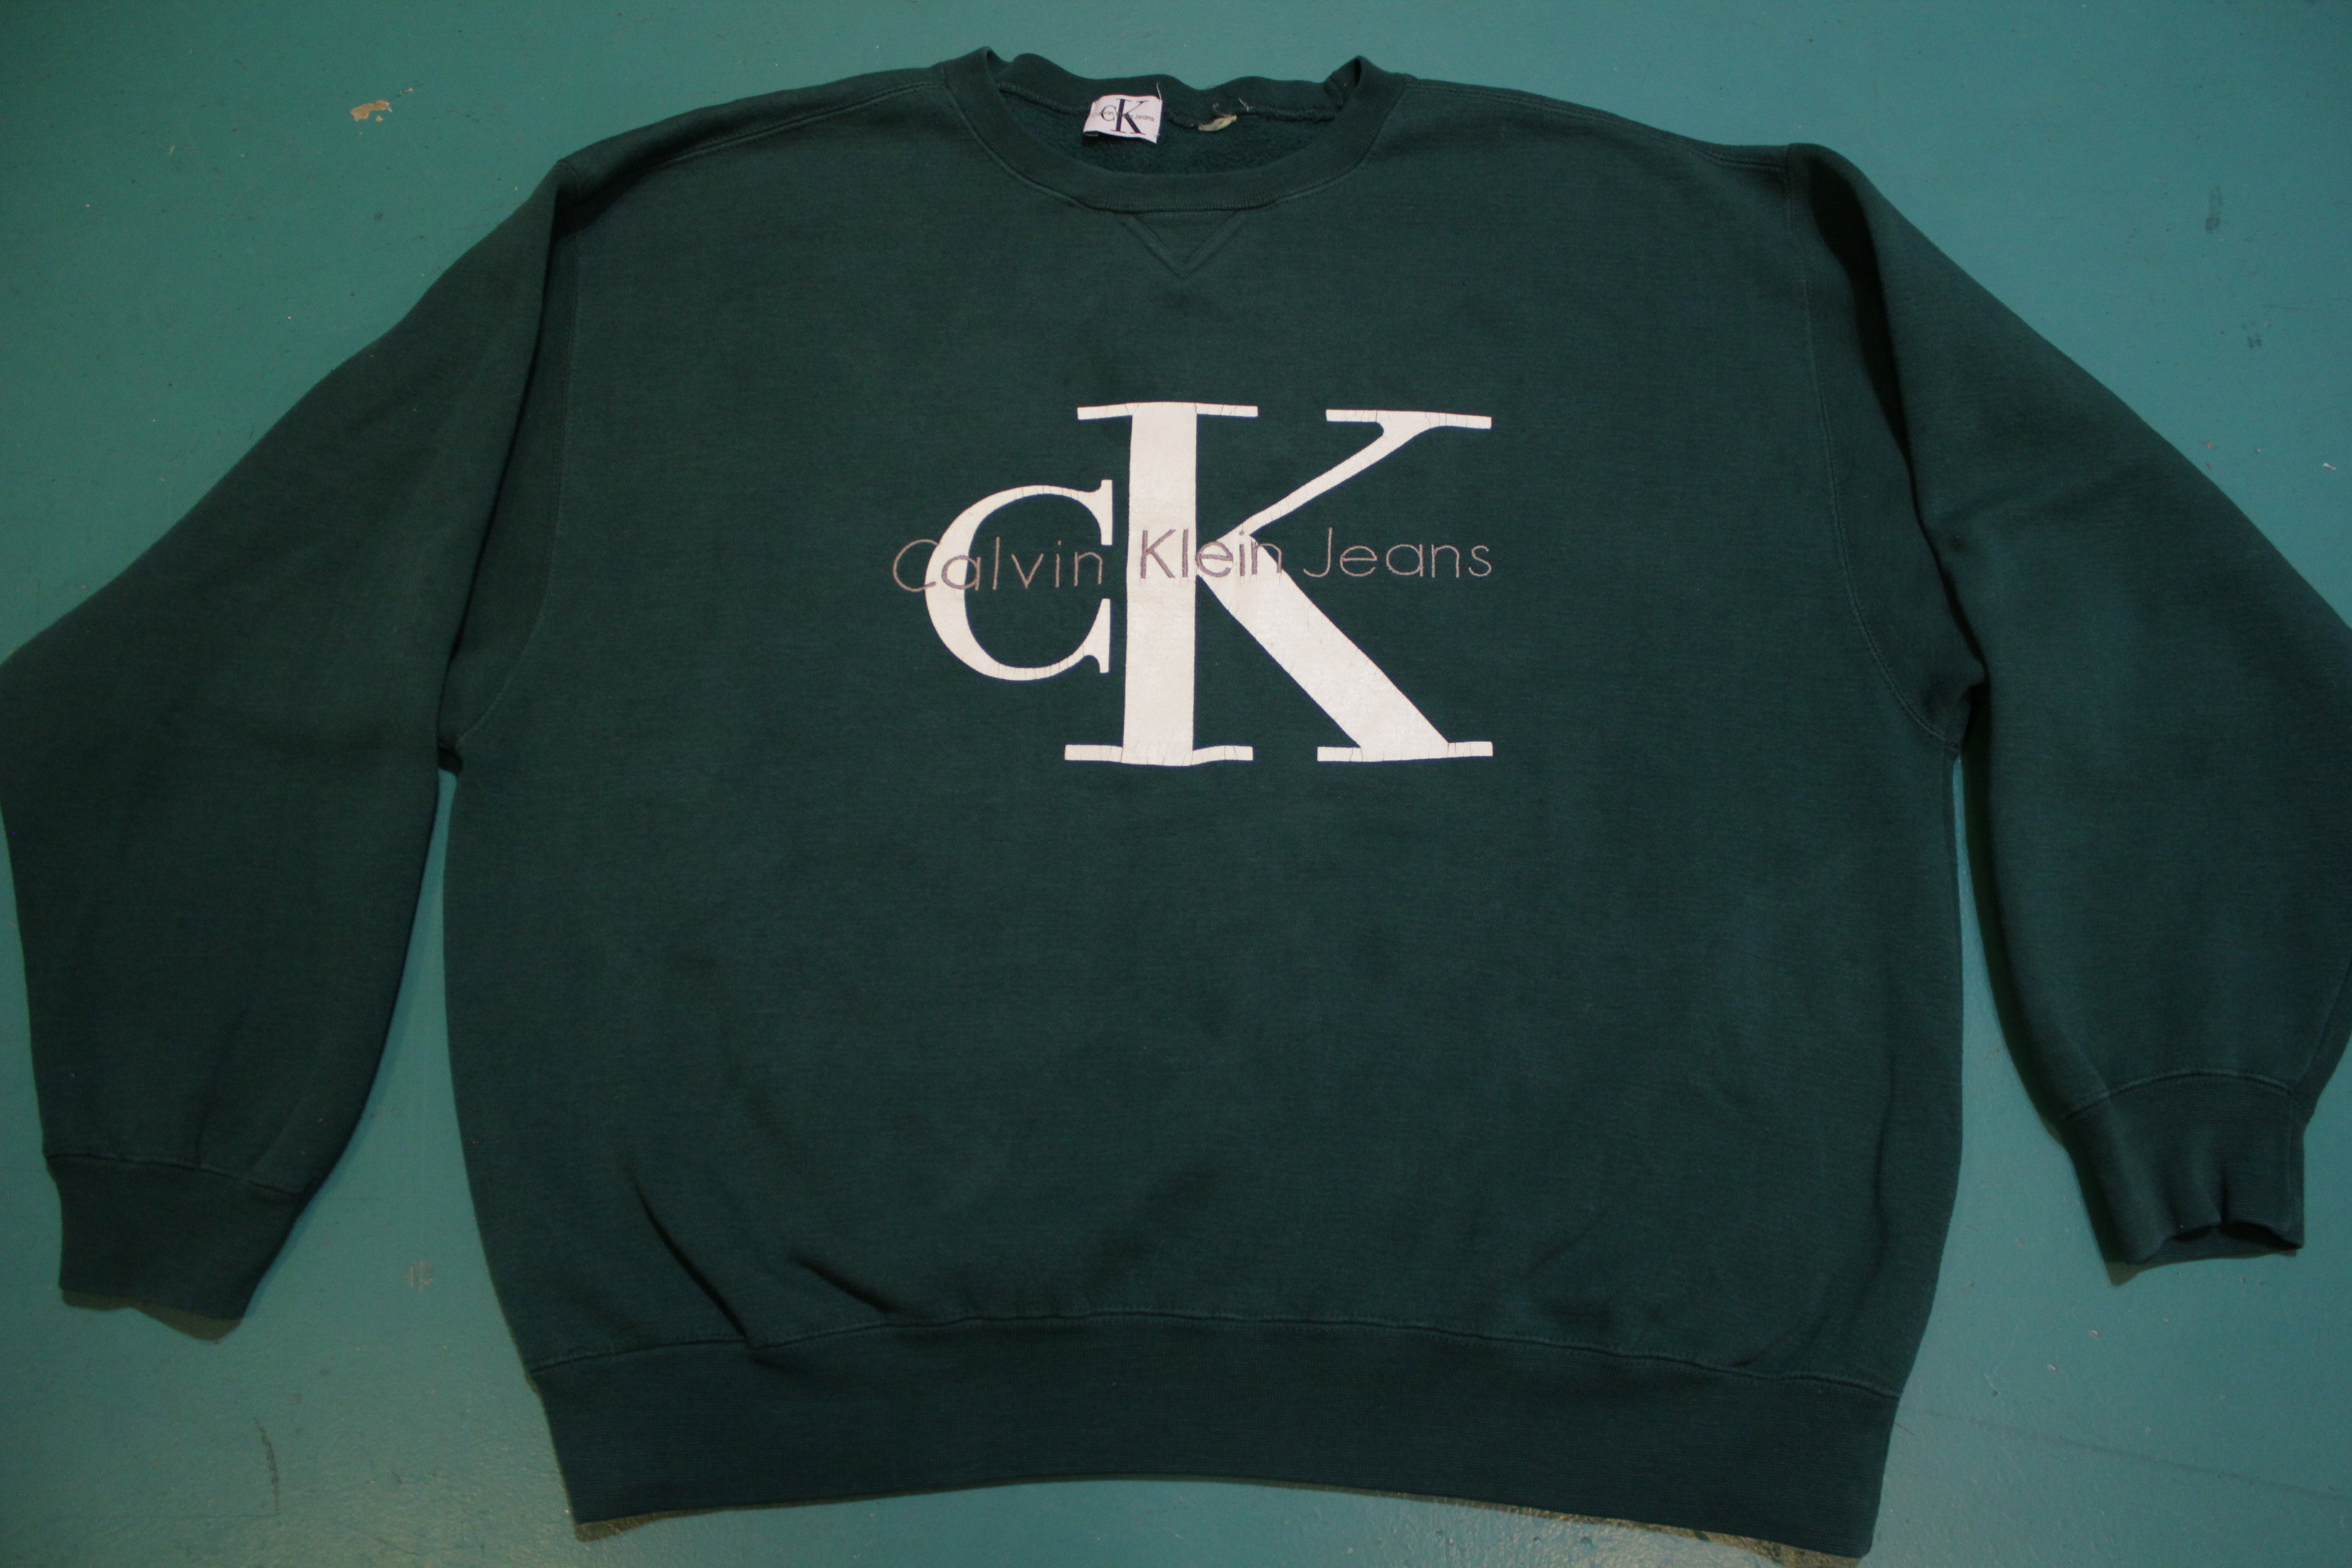 VINTAGE 90s CK CALVIN KLEIN JEANS SPELL OUT LOGO T SHIRT USA Size L White 